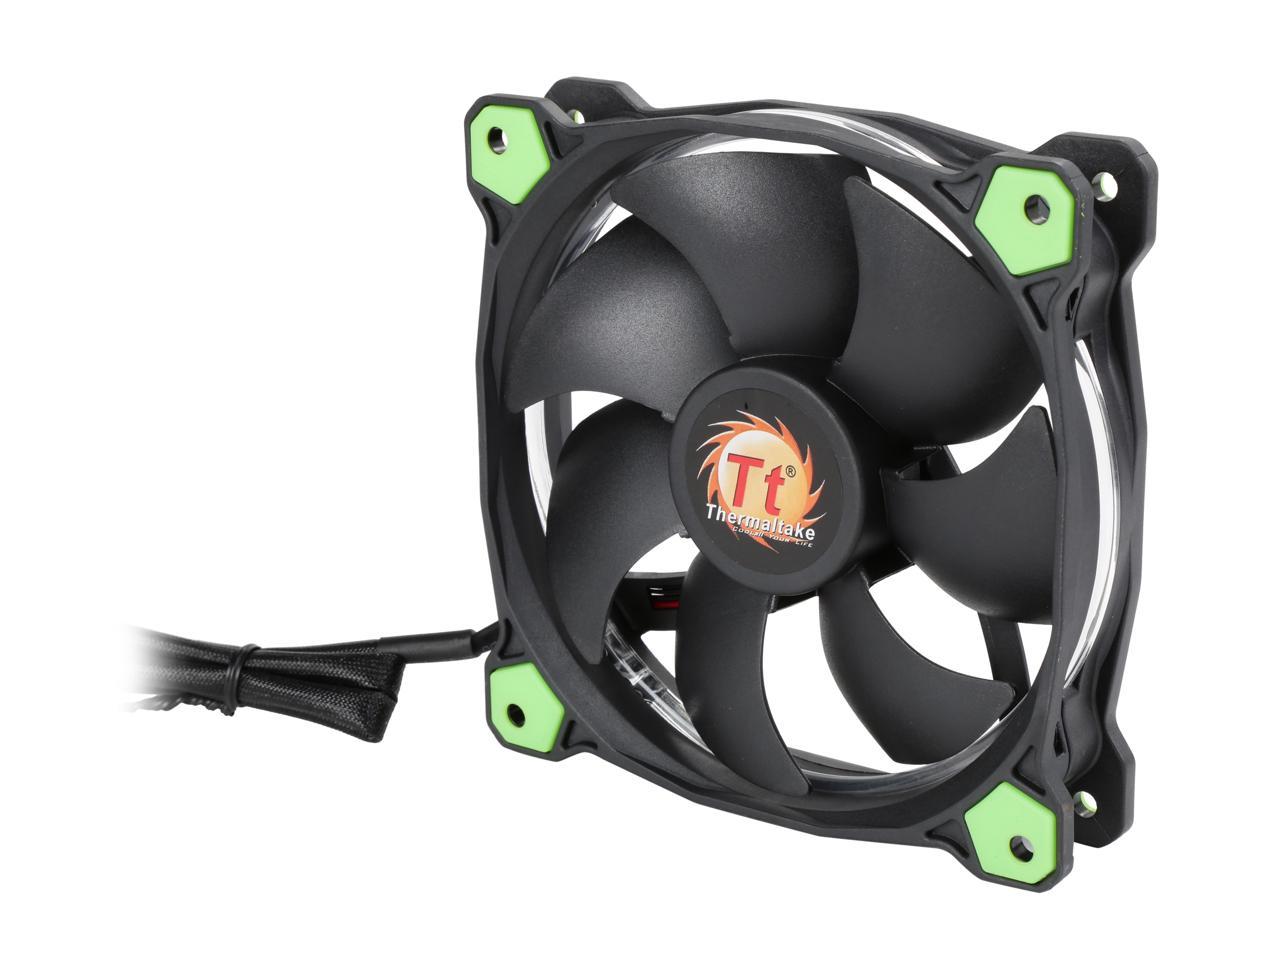 Thermaltake Riing 12 High Static Pressure 120Mm Circular Ring Led Case/Radiator Fan With Anti-Vibration Mounting System - Green - 3 Pks